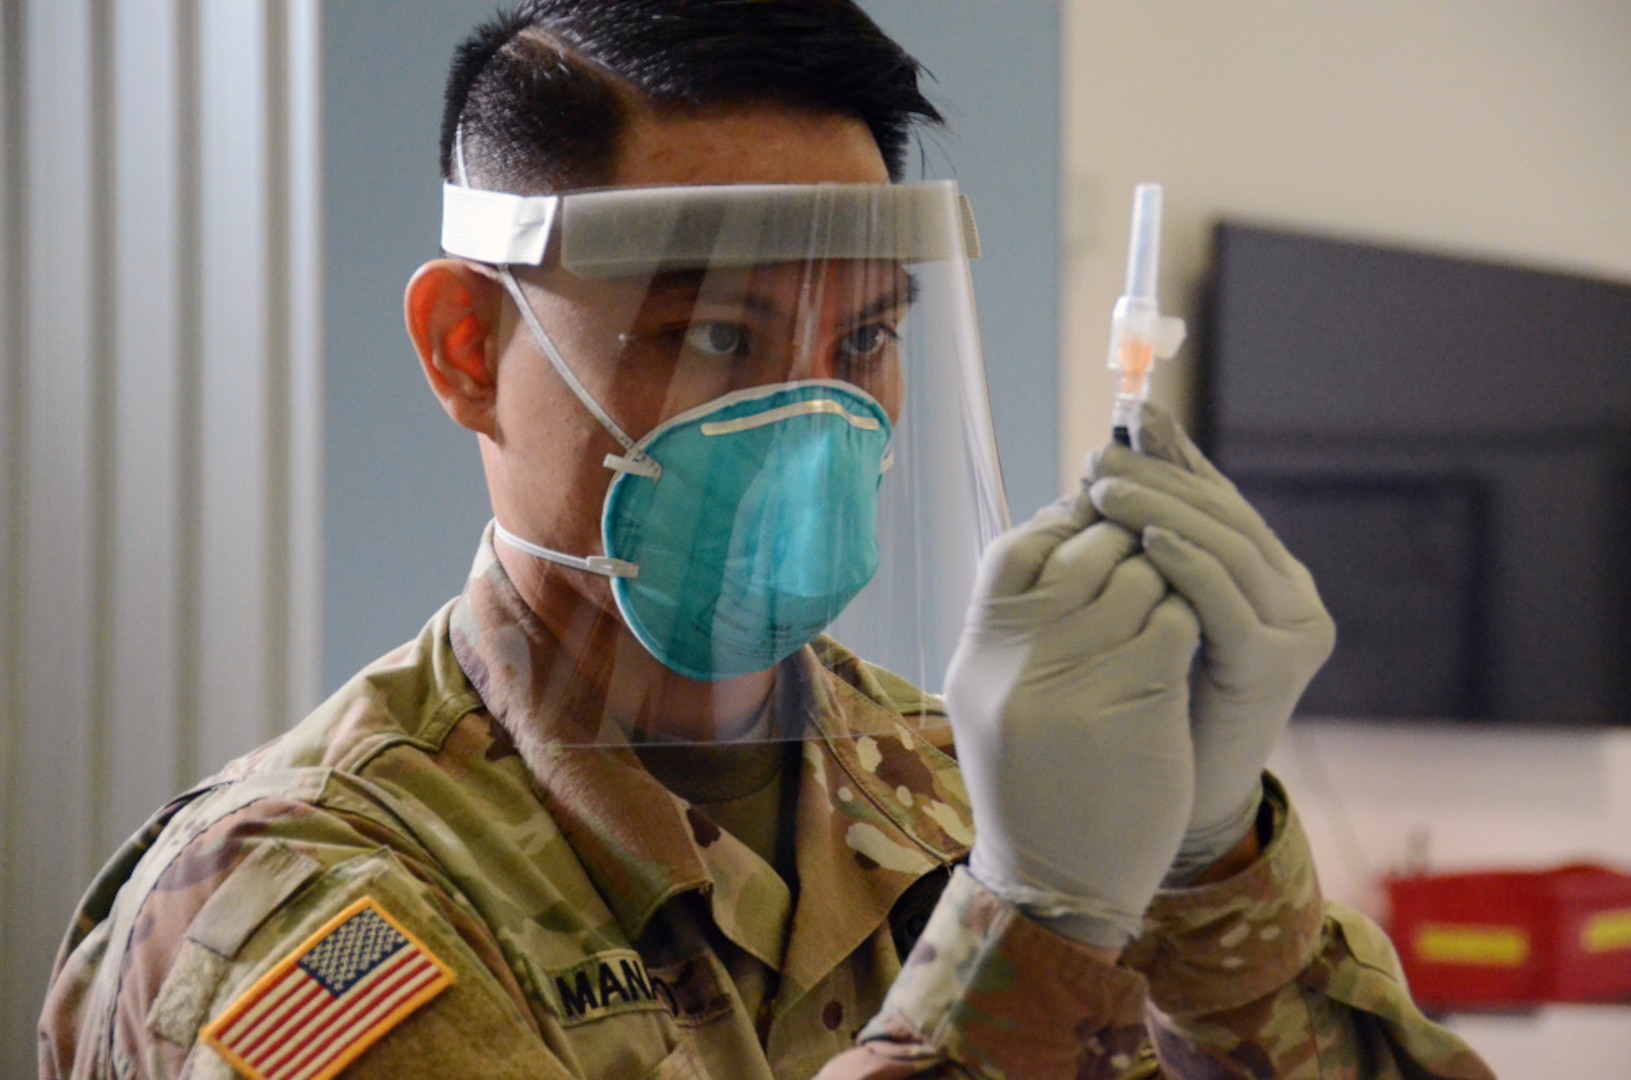 A man in a military operational camo pattern uniform holds a syringe while wearing personal protective equipment.